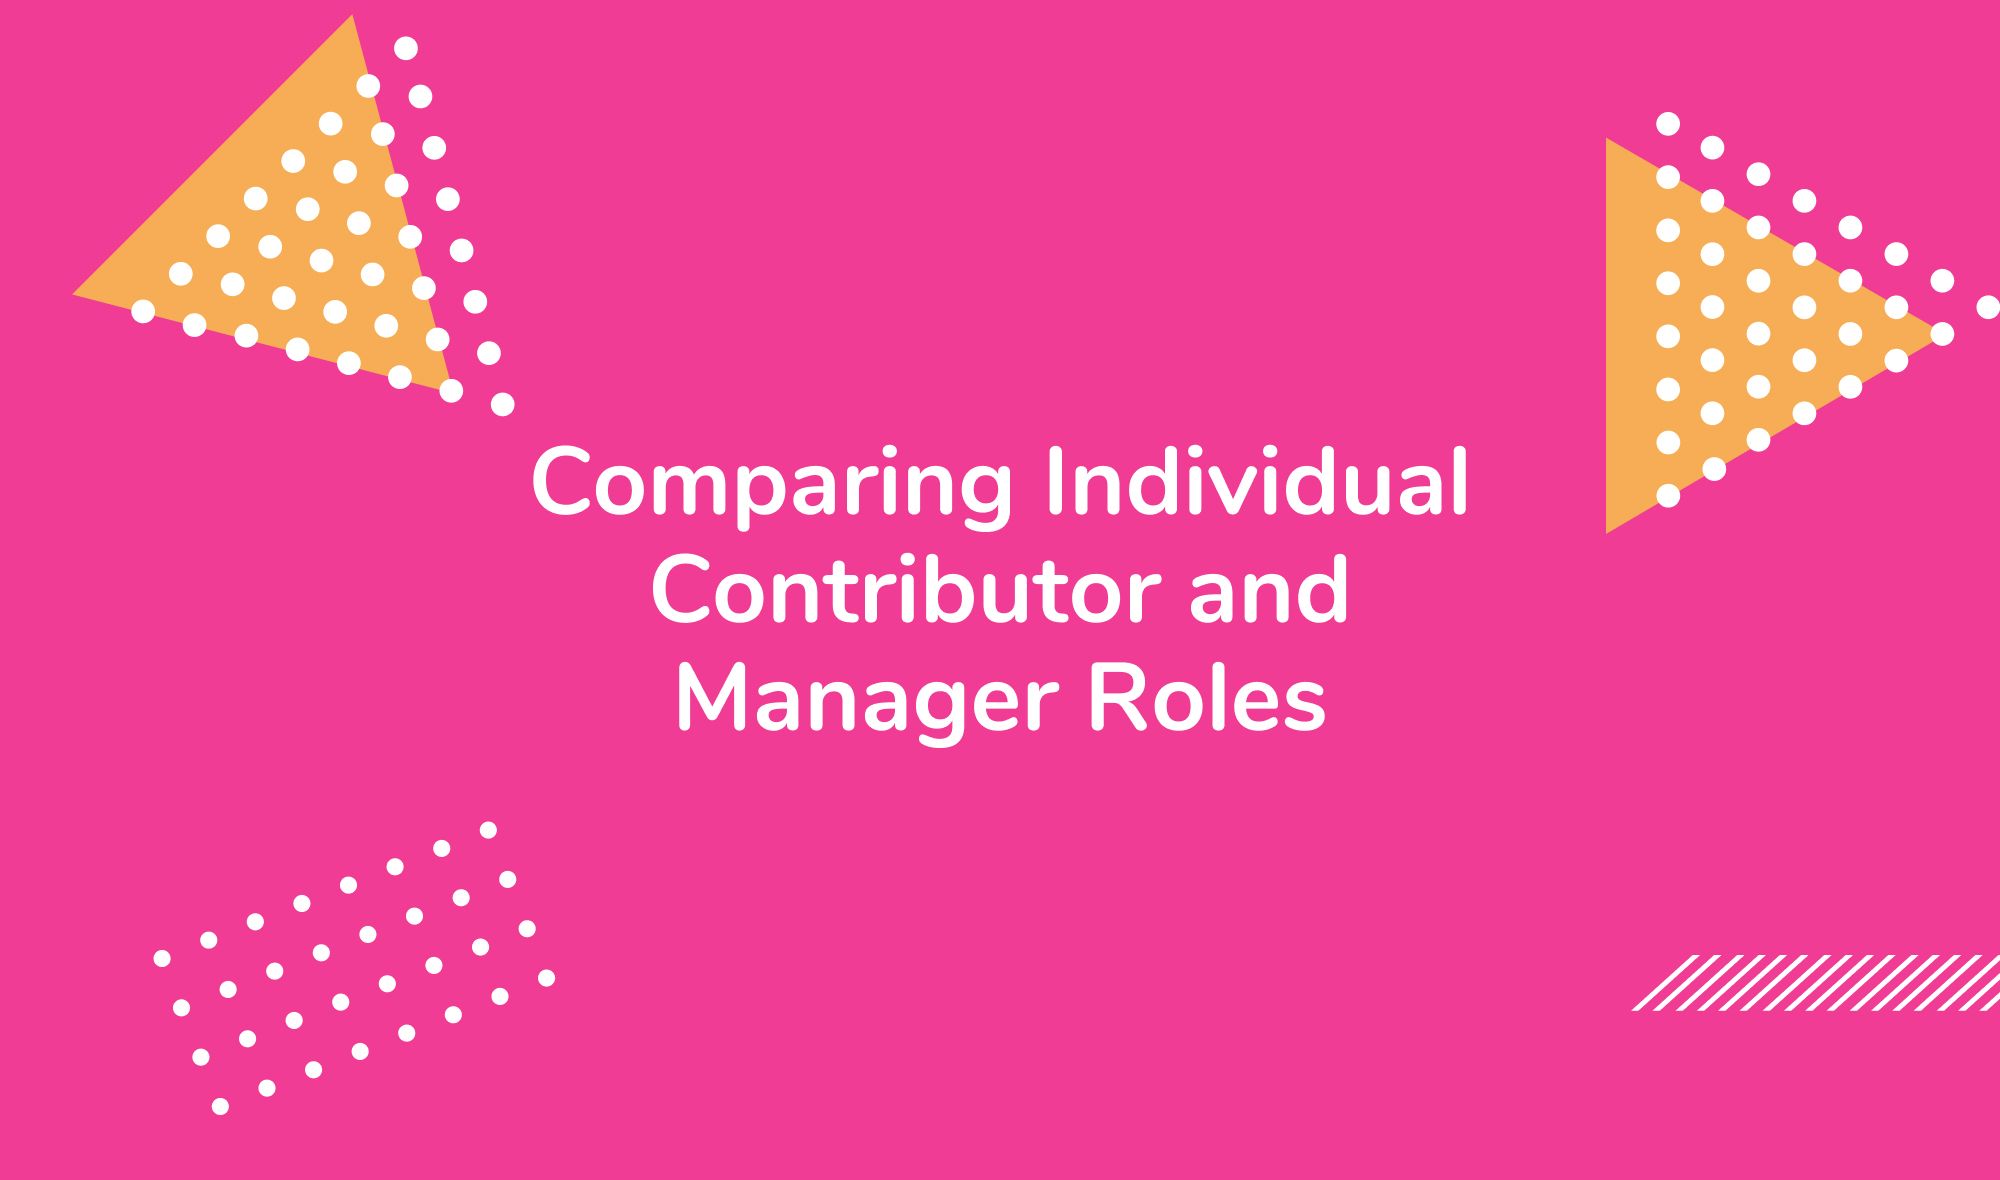 Comparing Individual Contributor and Manager Roles